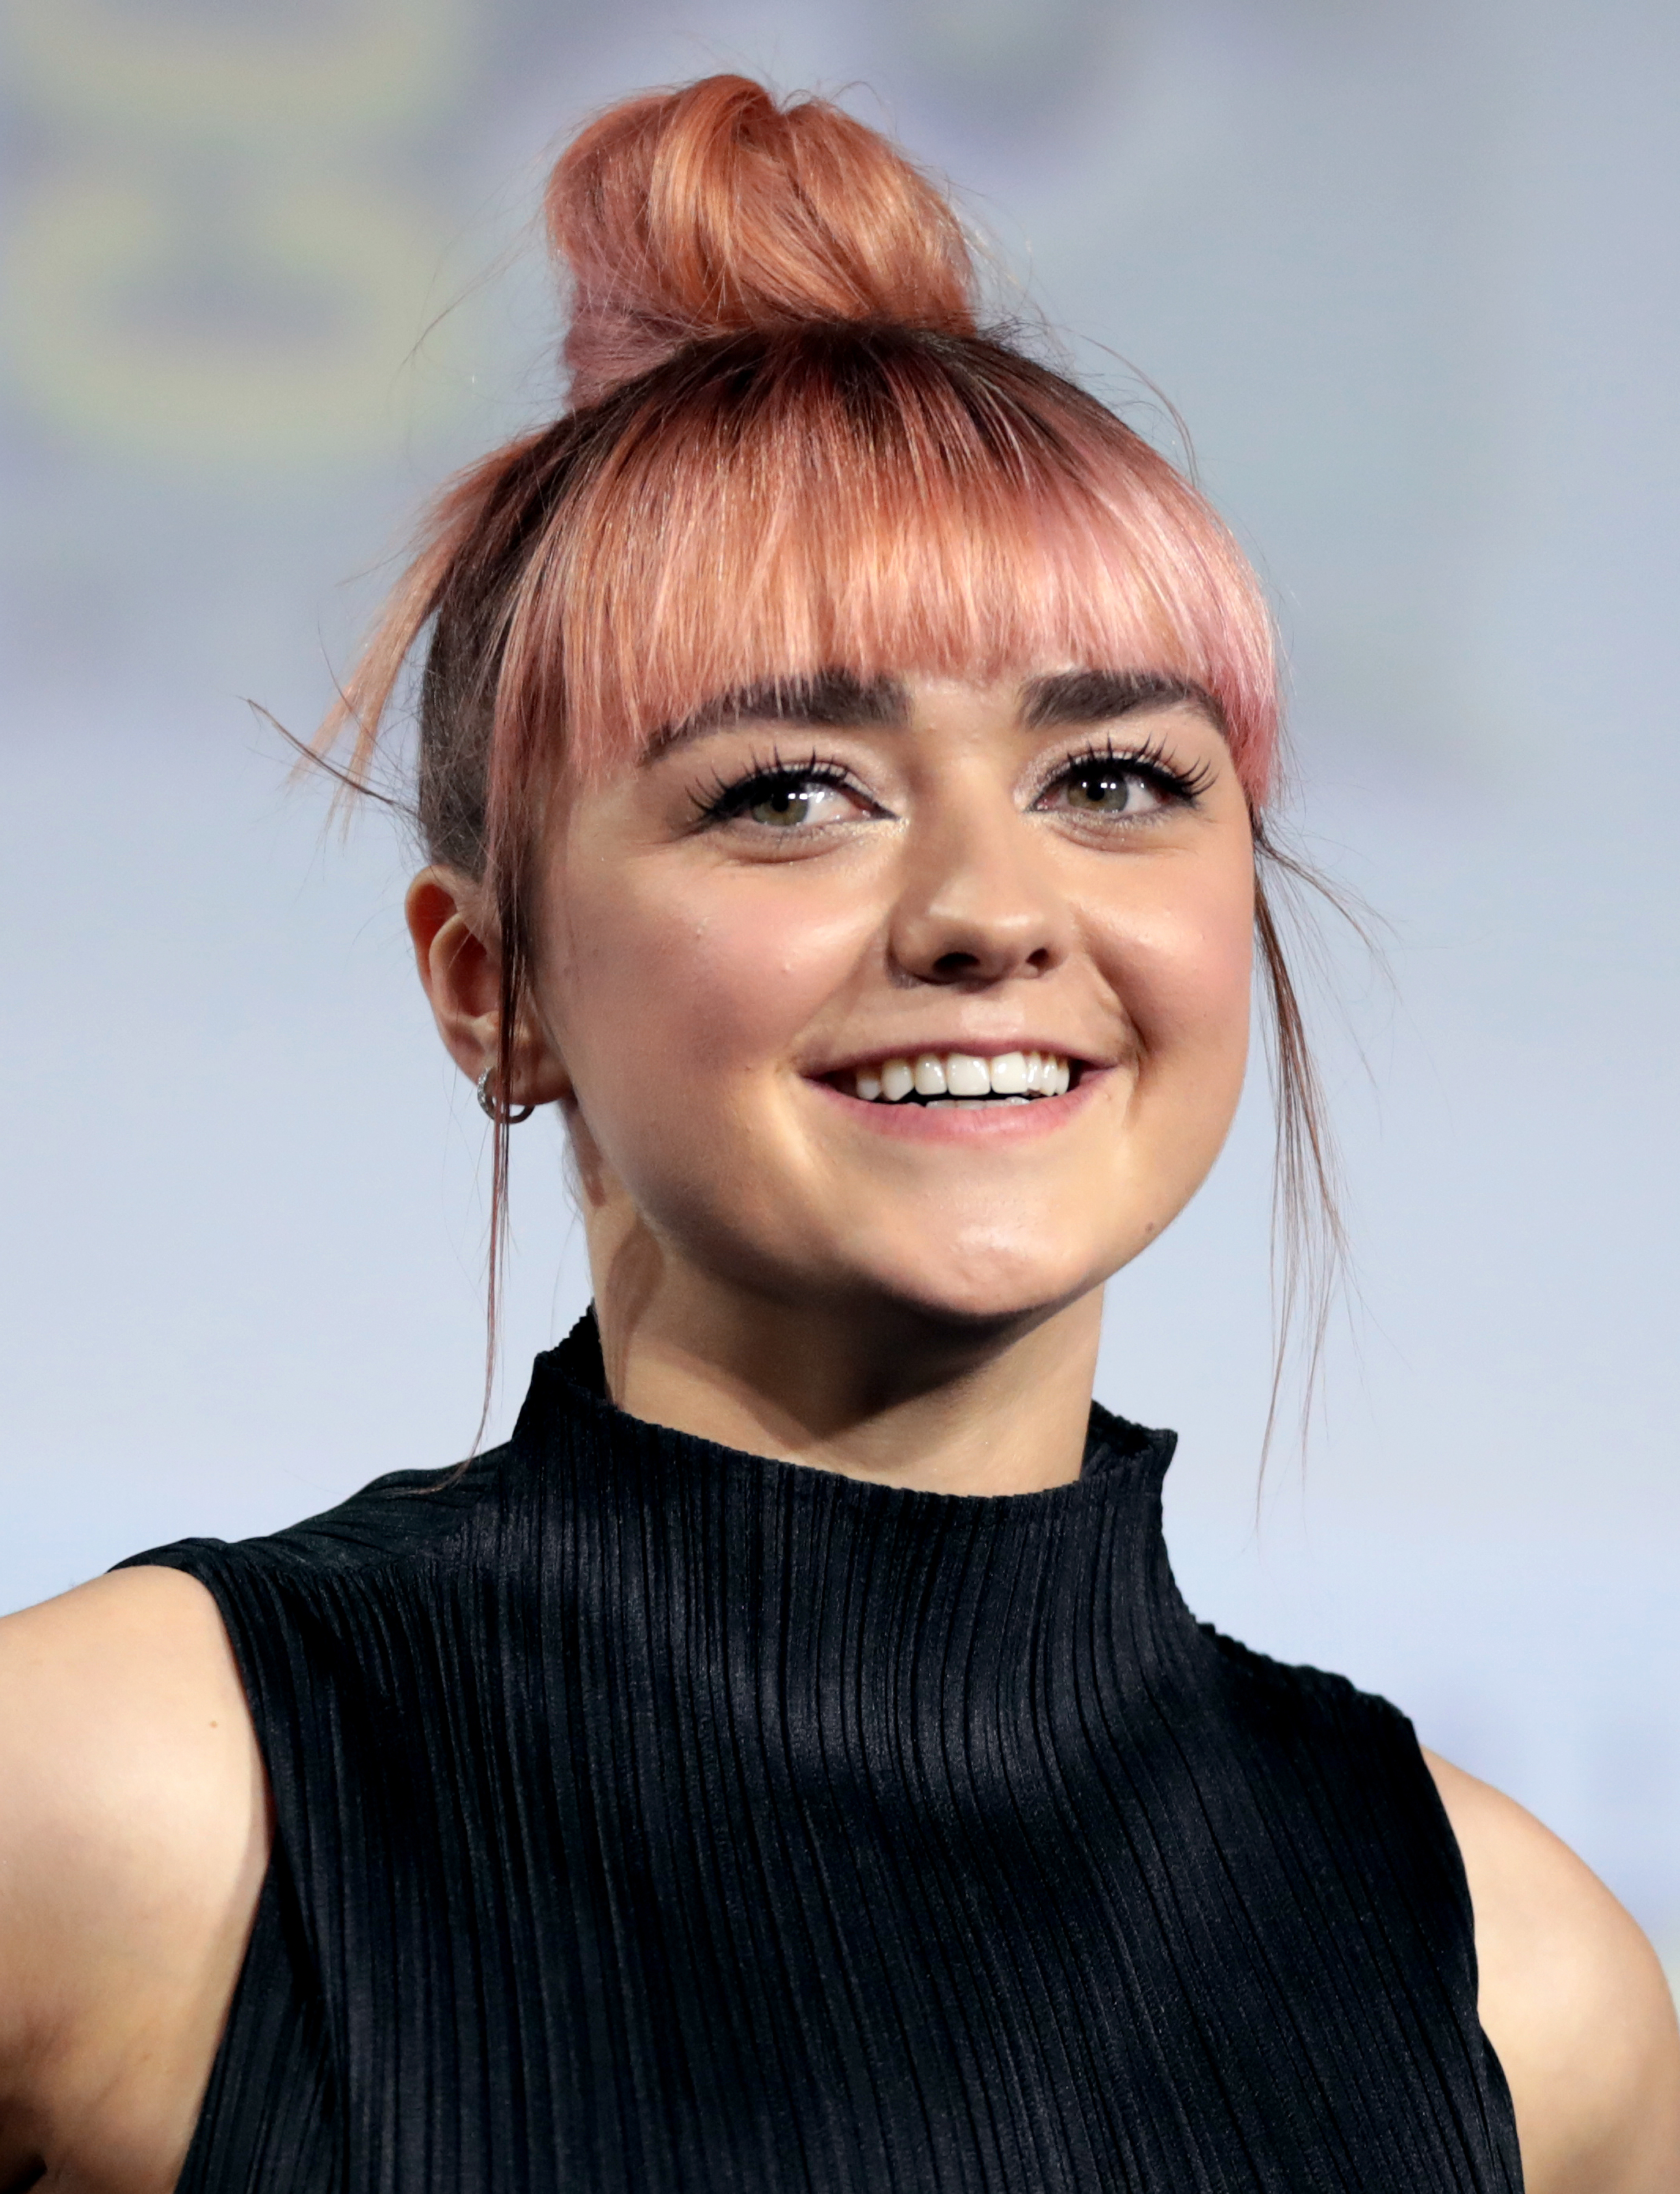 The 24-year old daughter of father Greg and mother Molly Maisie Williams in 2022 photo. Maisie Williams earned a  million dollar salary - leaving the net worth at 3 million in 2022